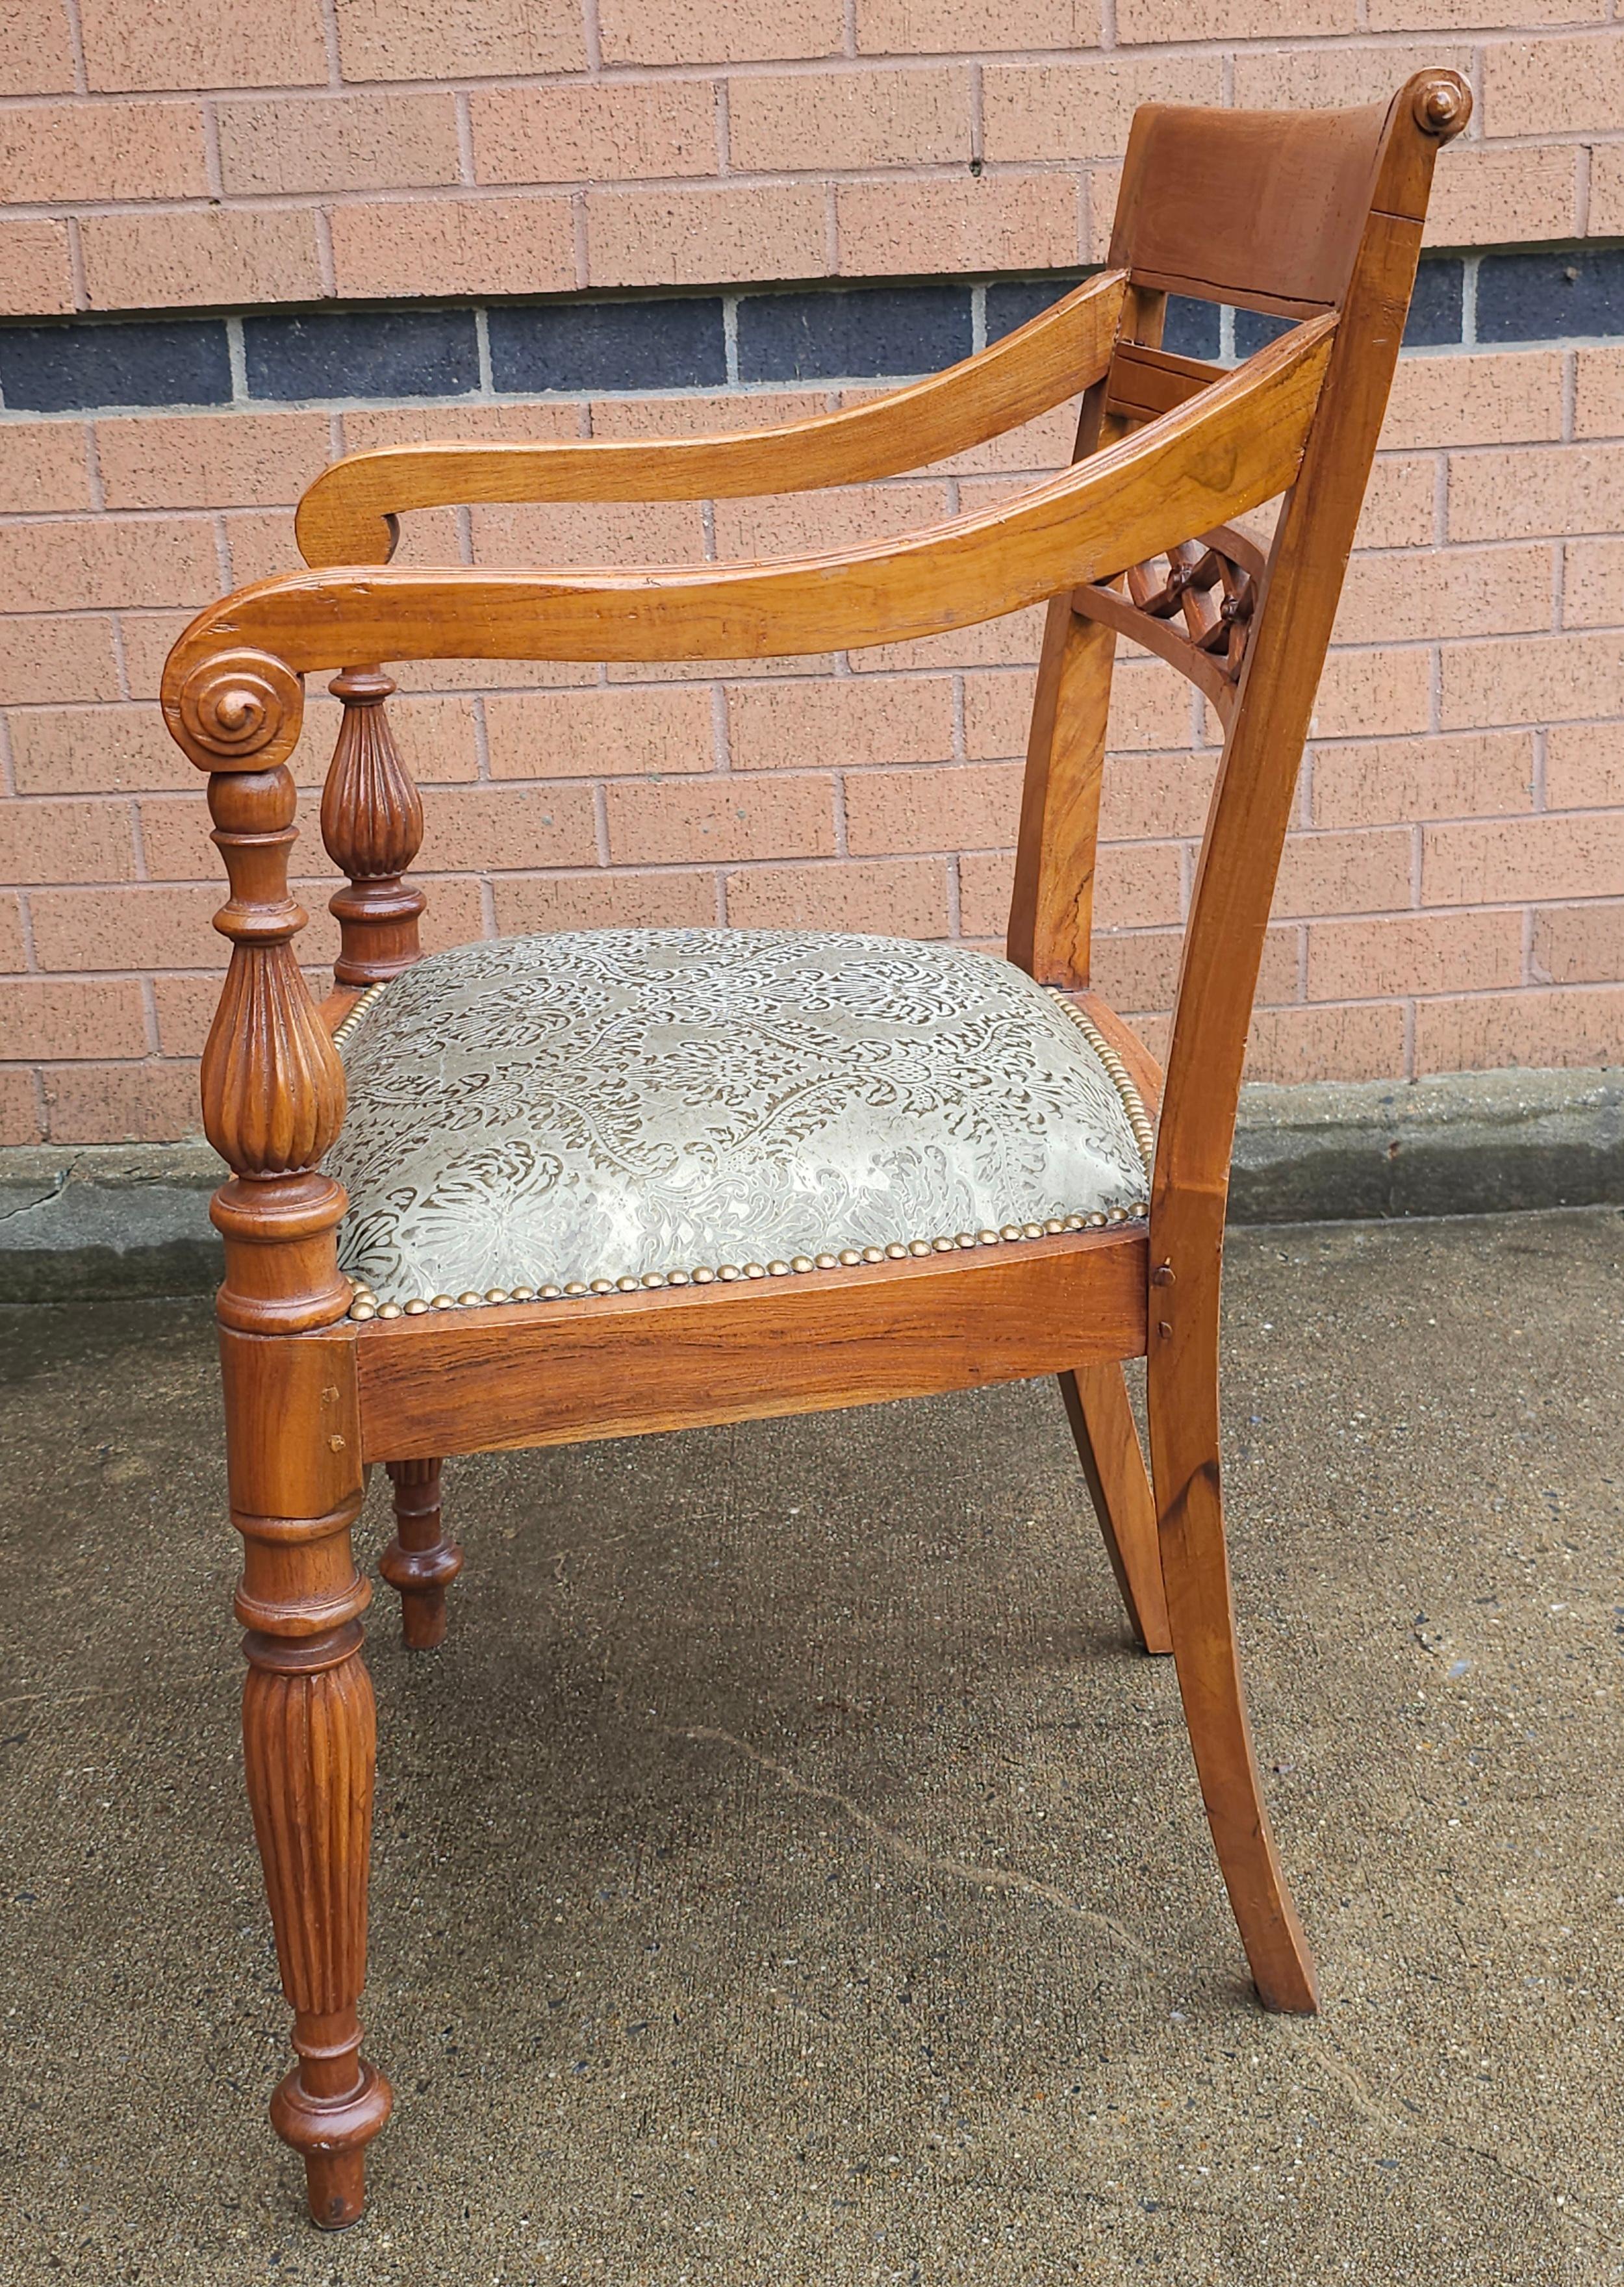 Anglo Indian Teak and Nailhead Trim Upholstered Armchair In Excellent Condition For Sale In Germantown, MD